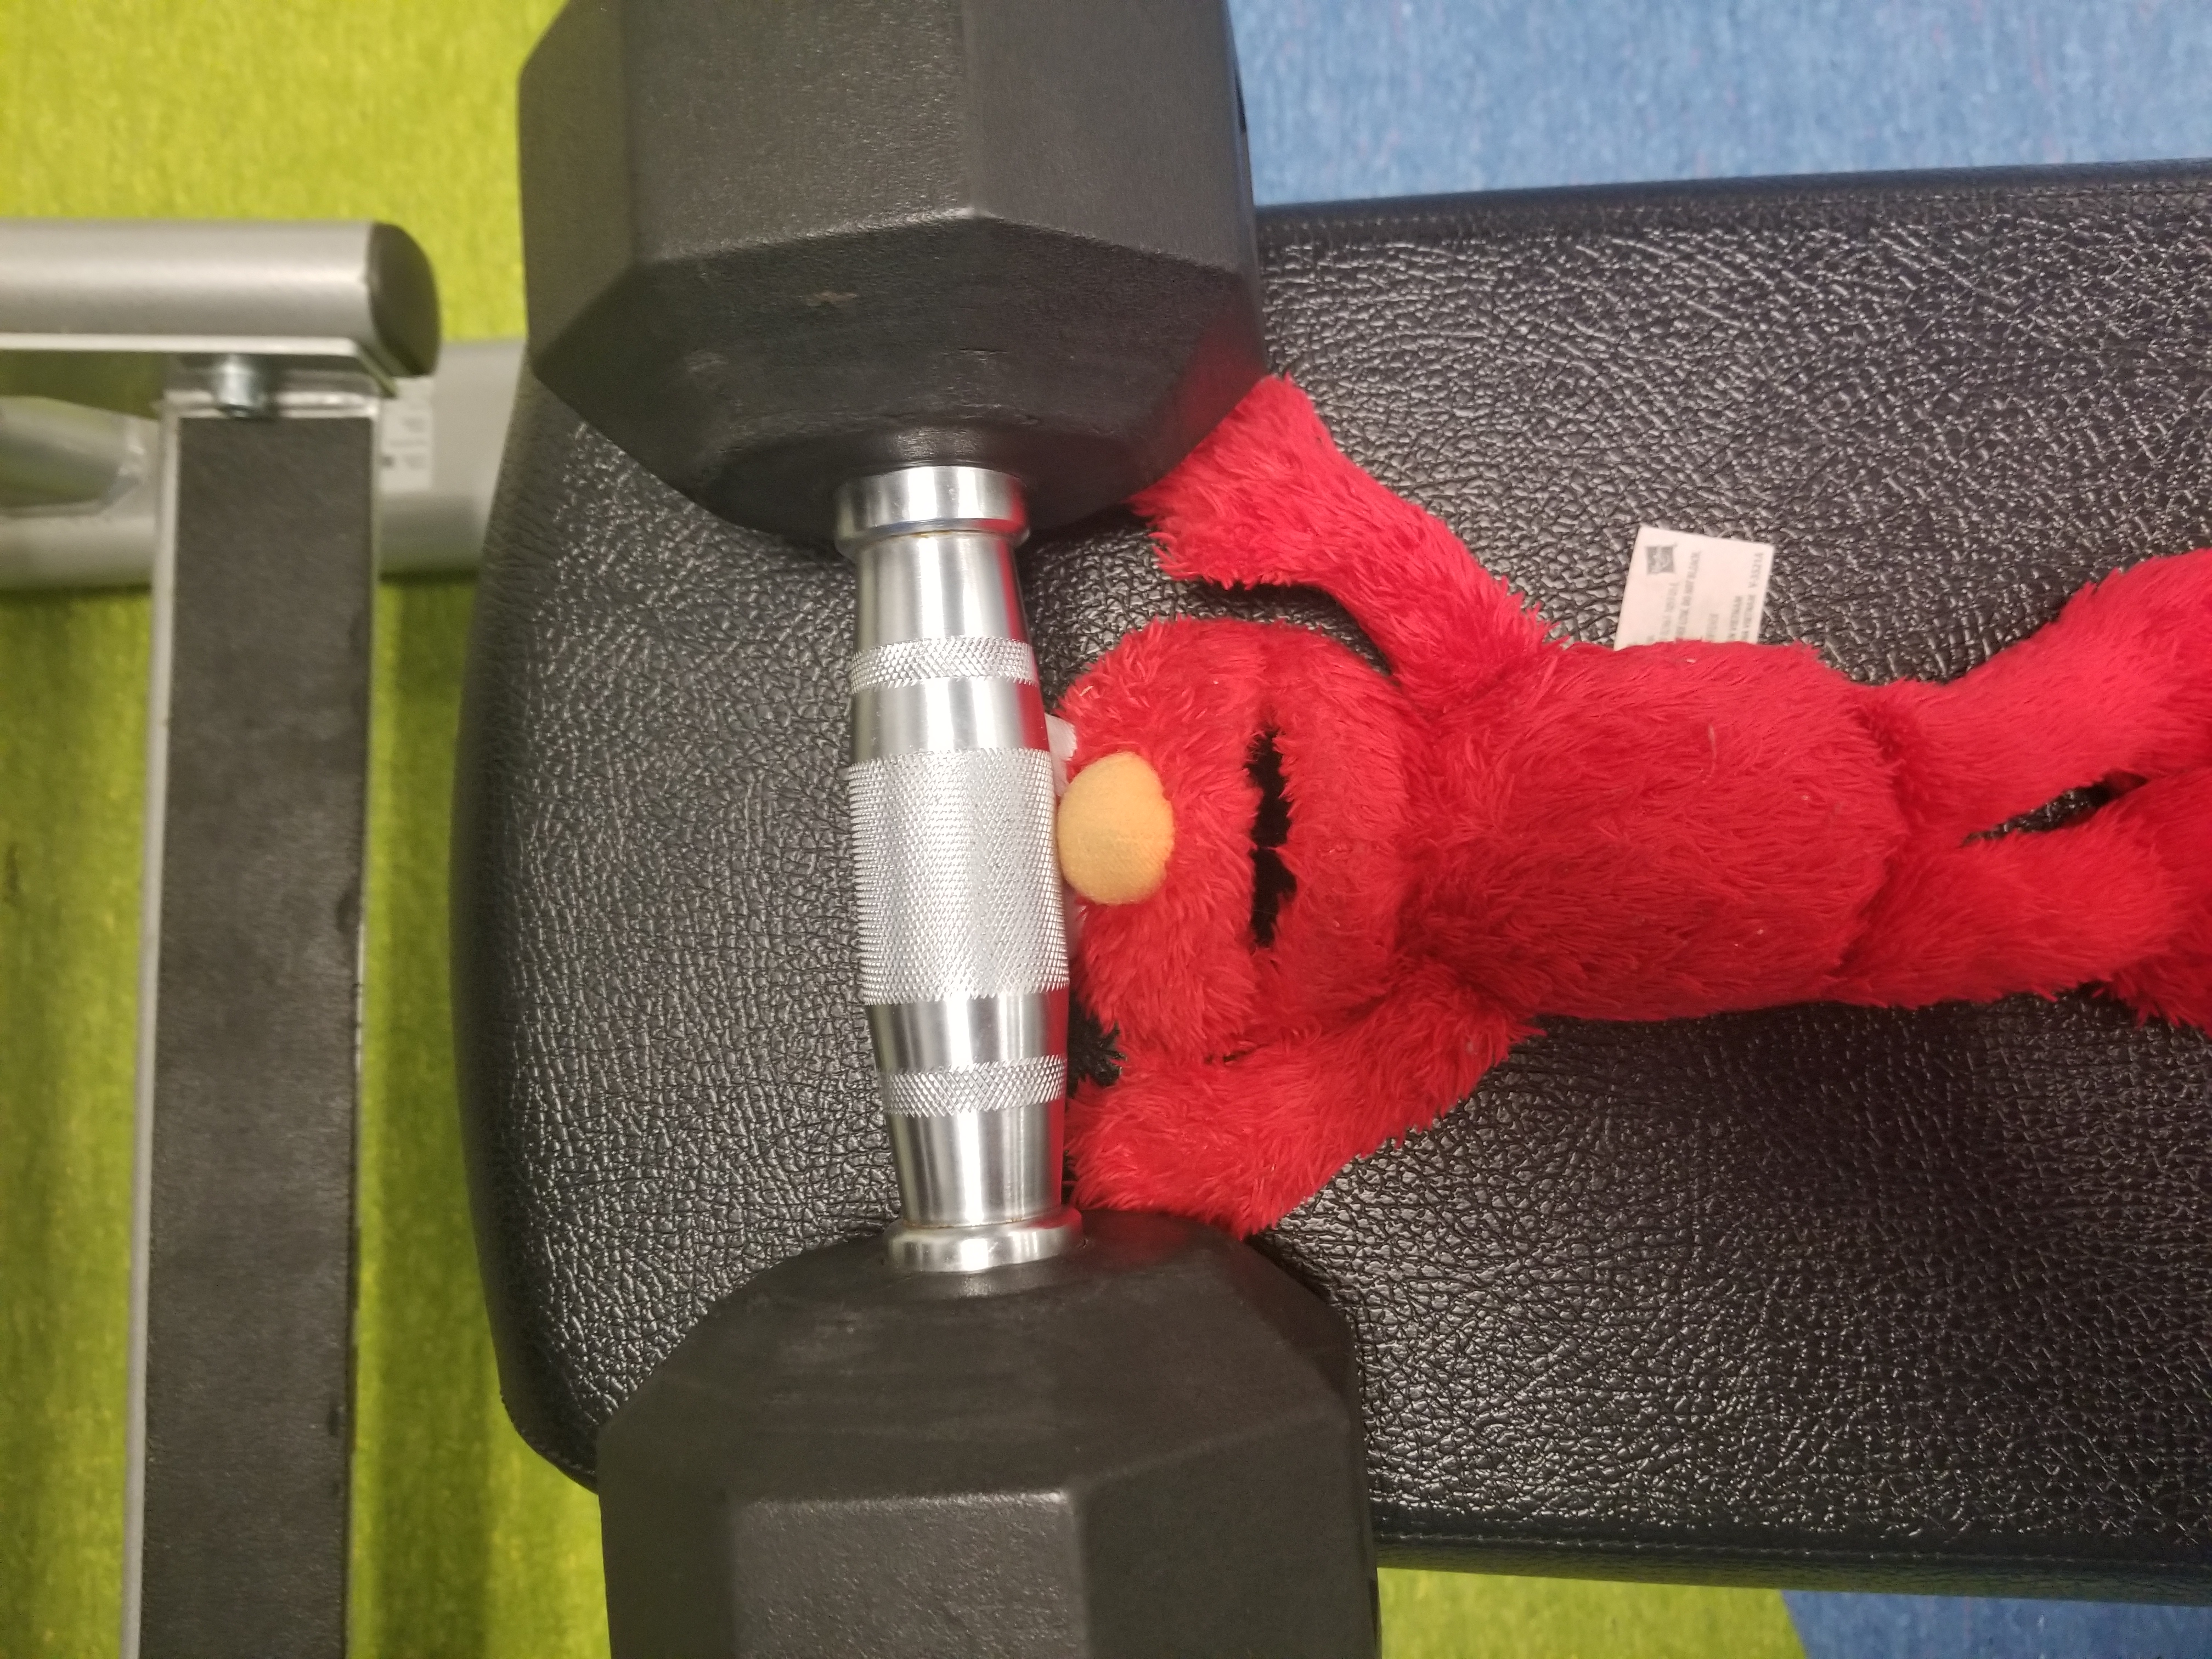 Elmo Lifts Weights